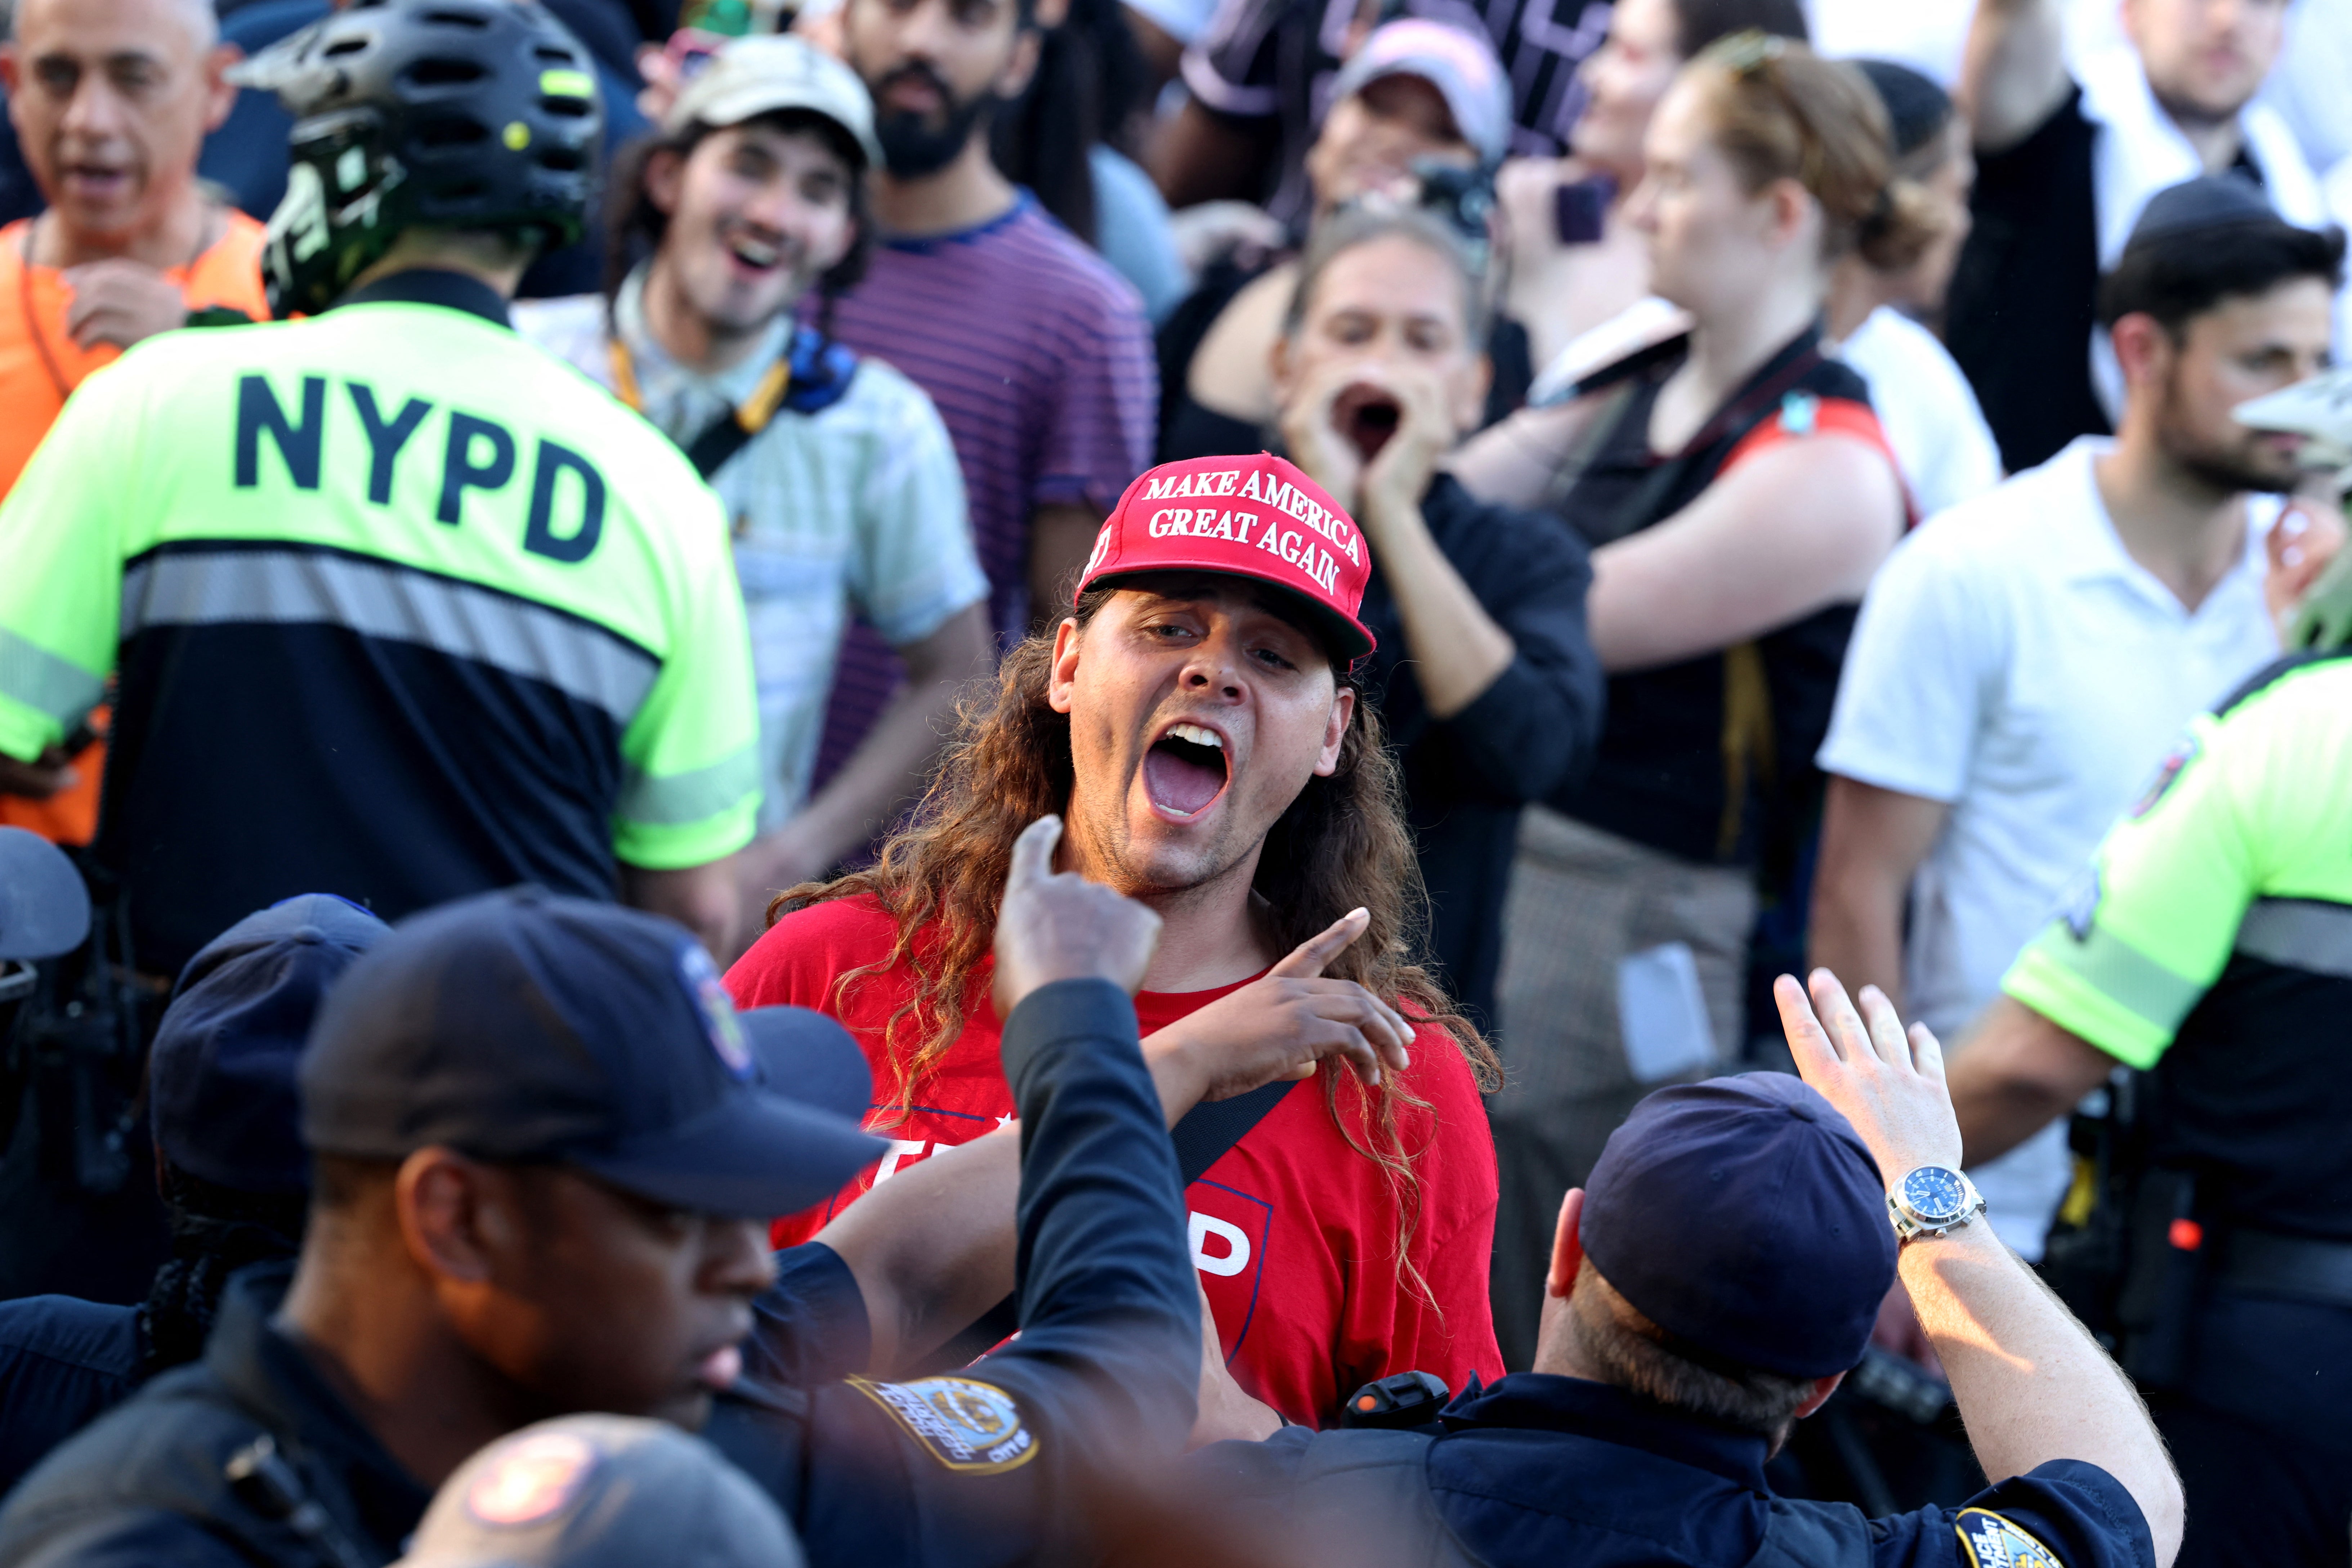 A Trump supporter confronts protestors during the campaign rally in the South Bronx in New York City on 23 May